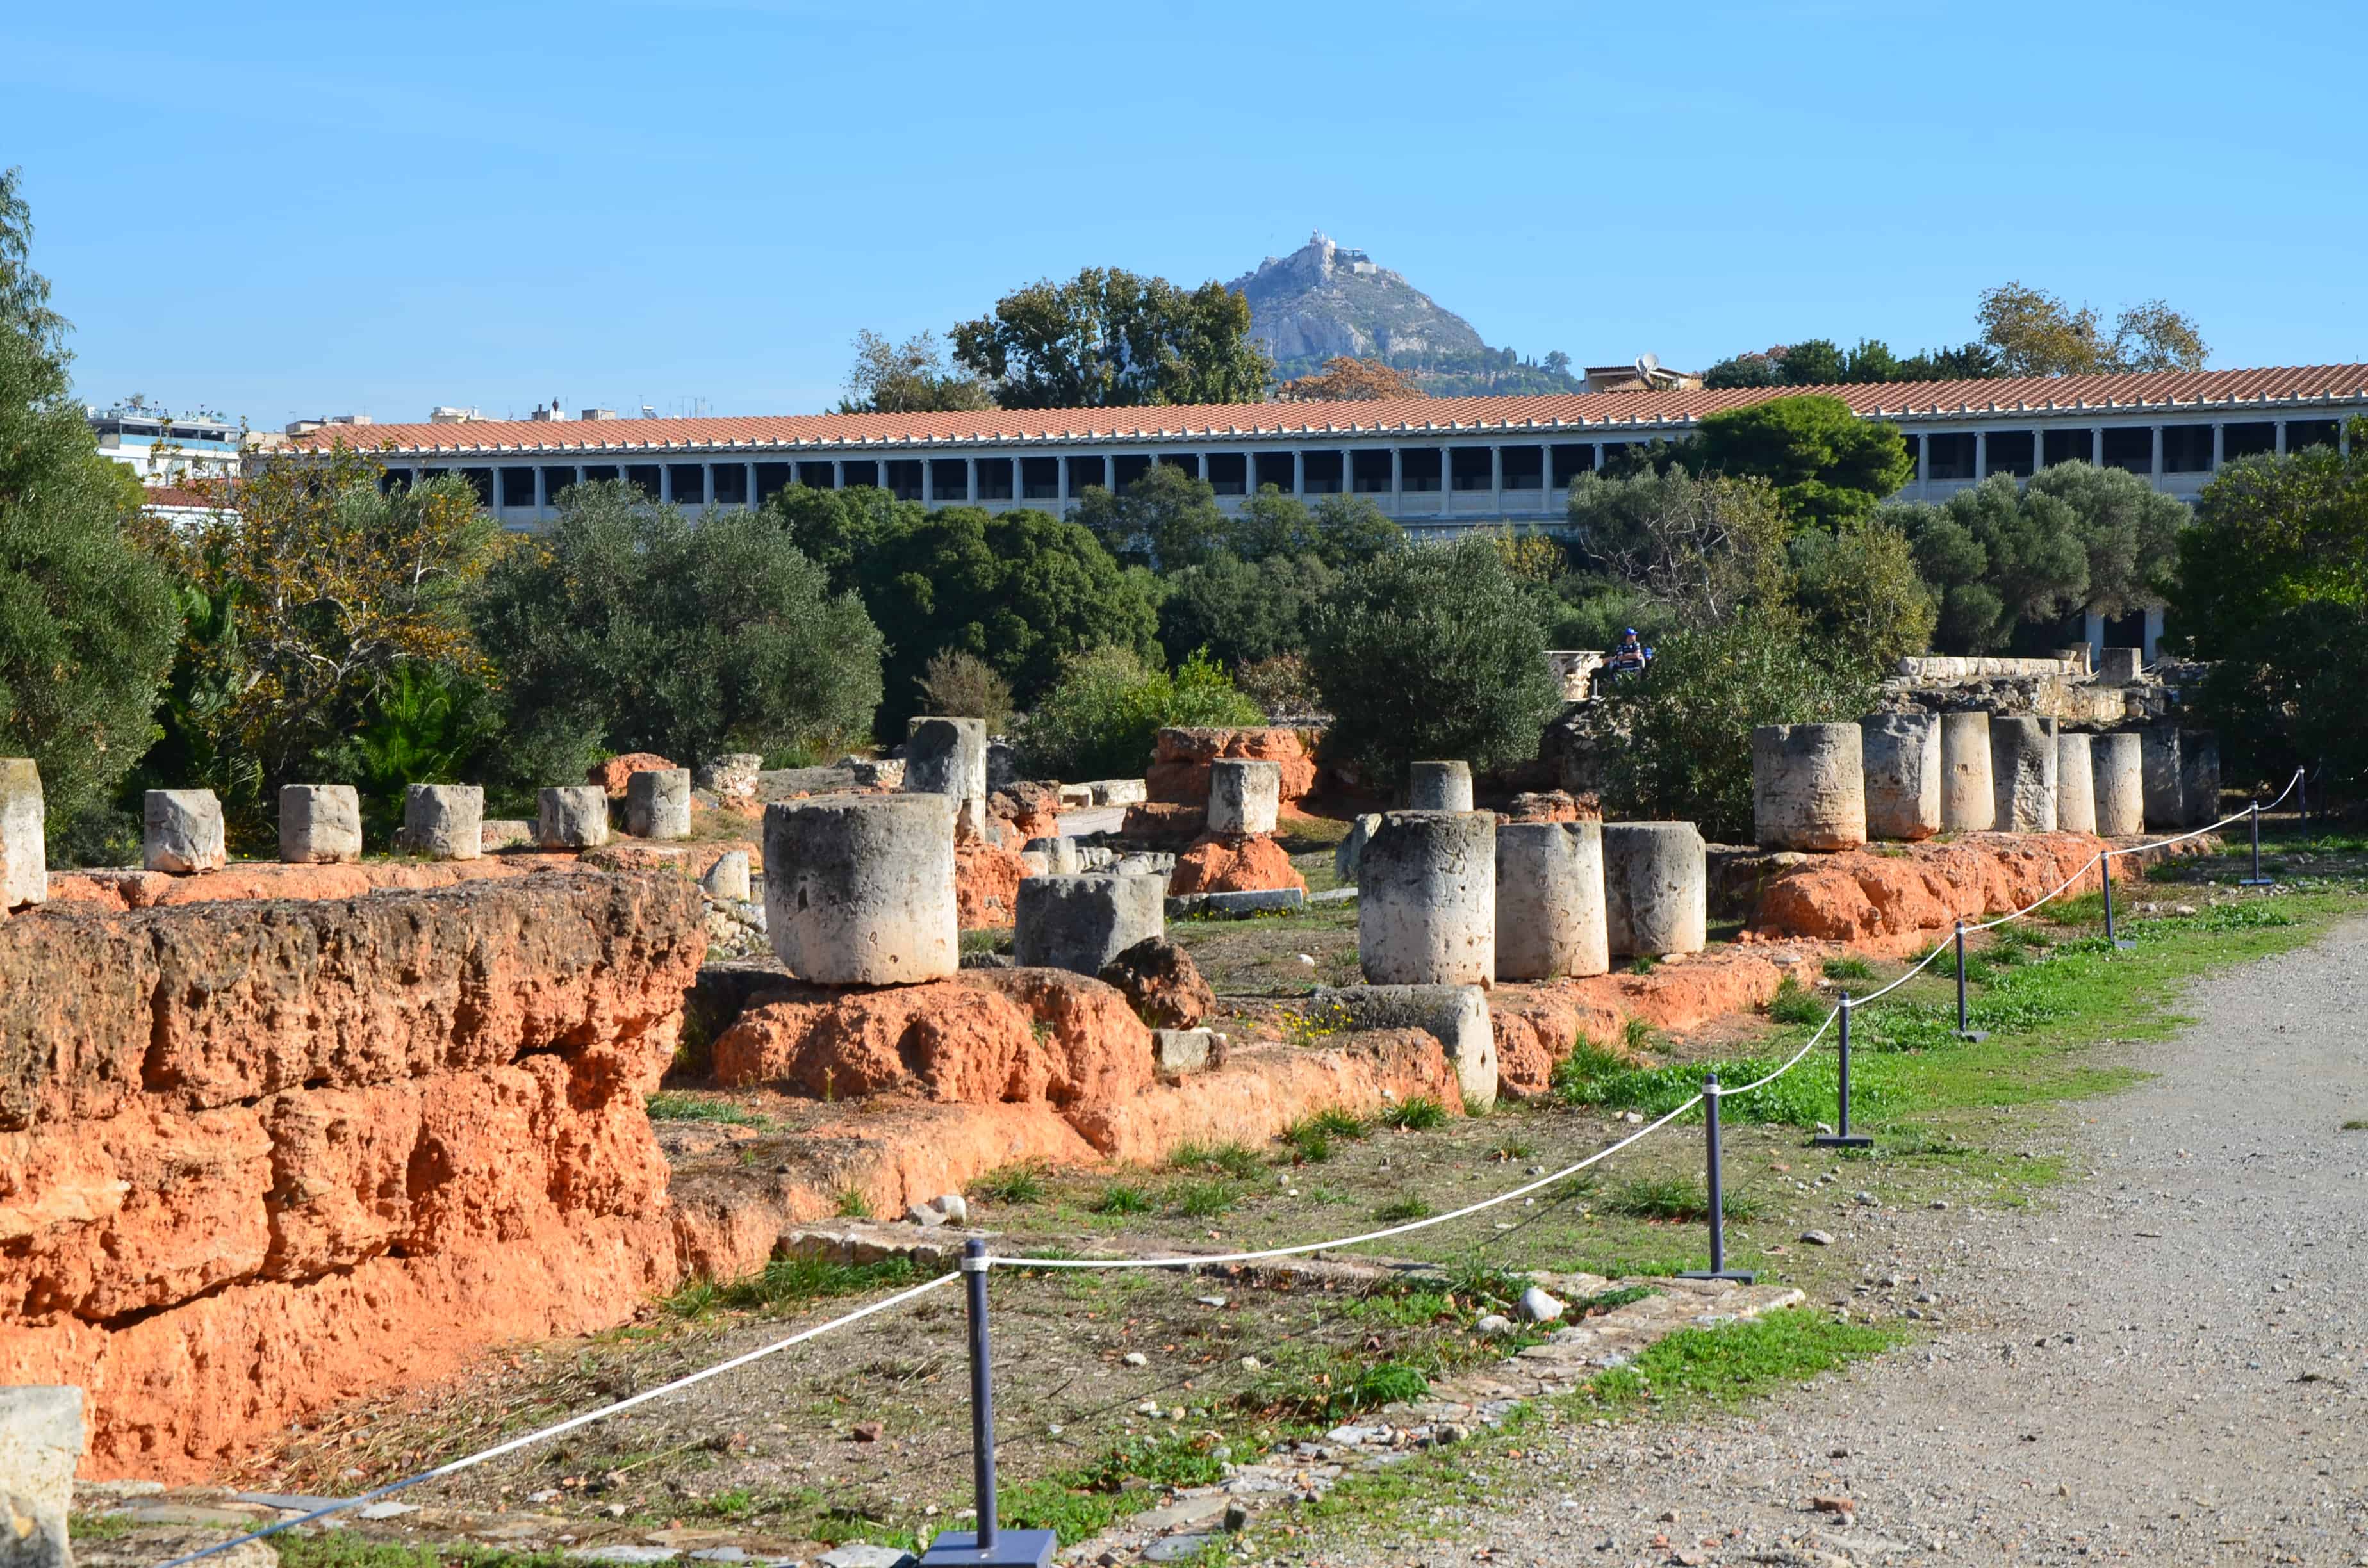 Red stone foundation of the Middle Stoa at the Agora in Athens, Greece